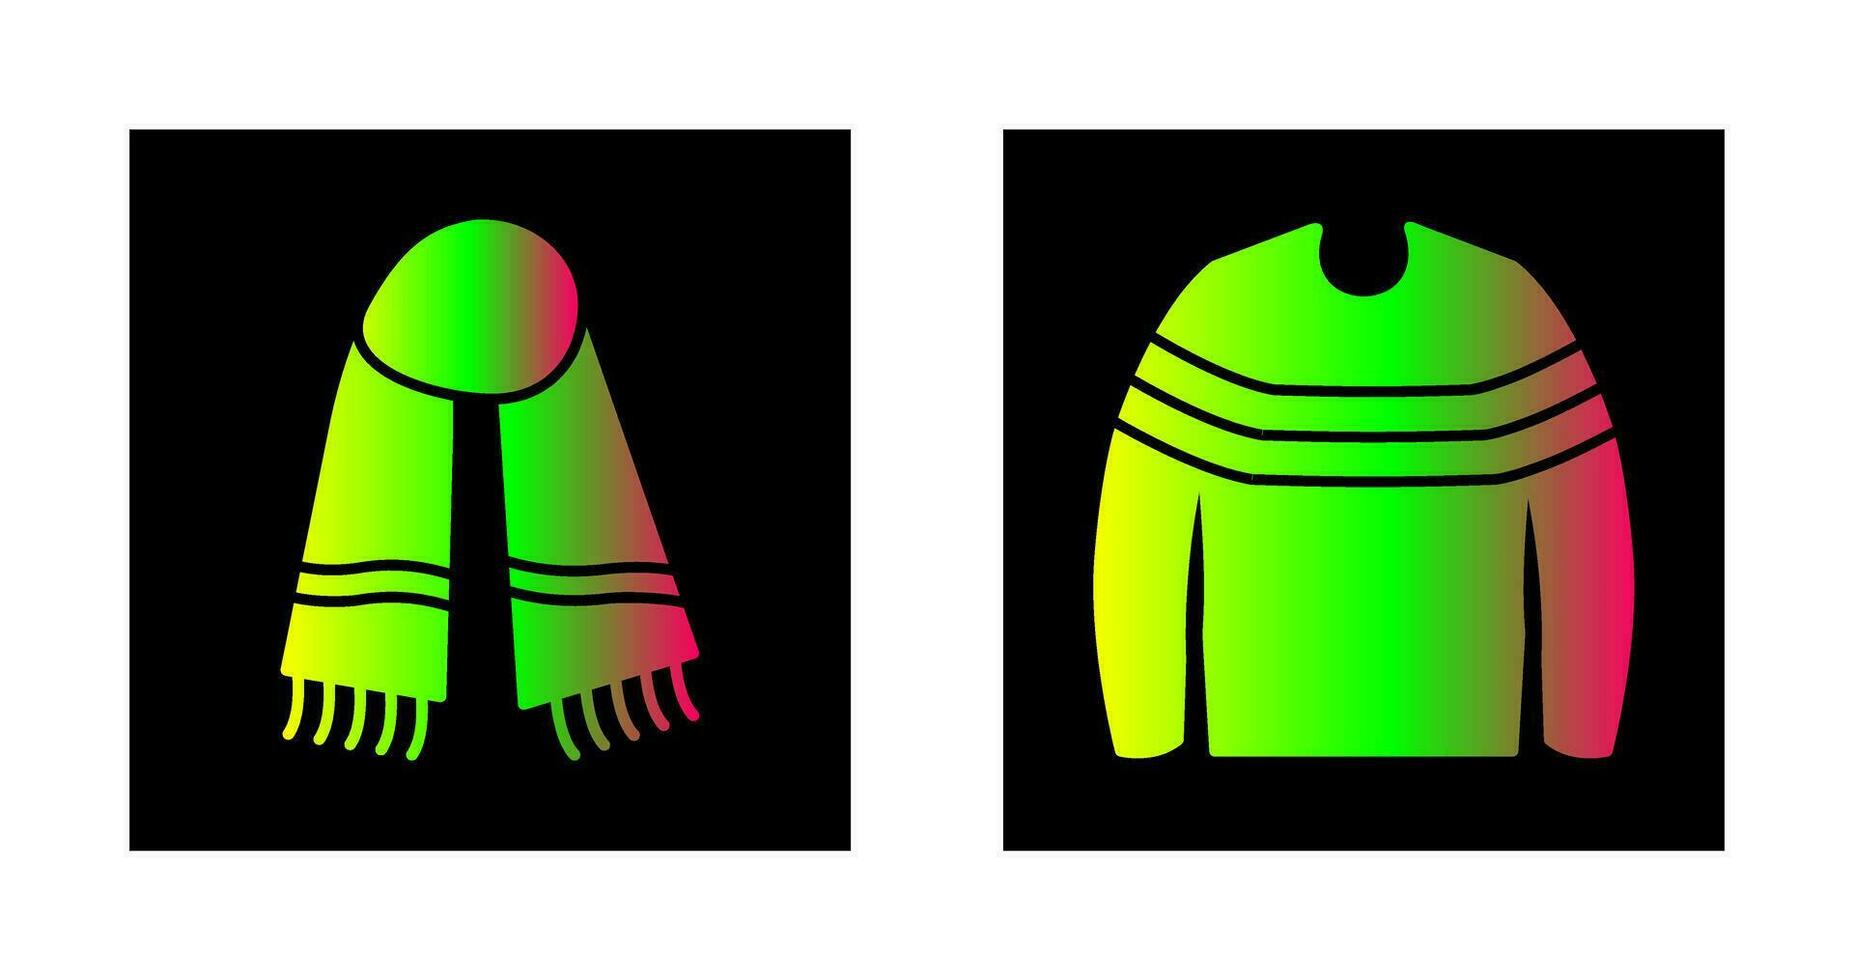 Warm Scarf and garments Icon vector